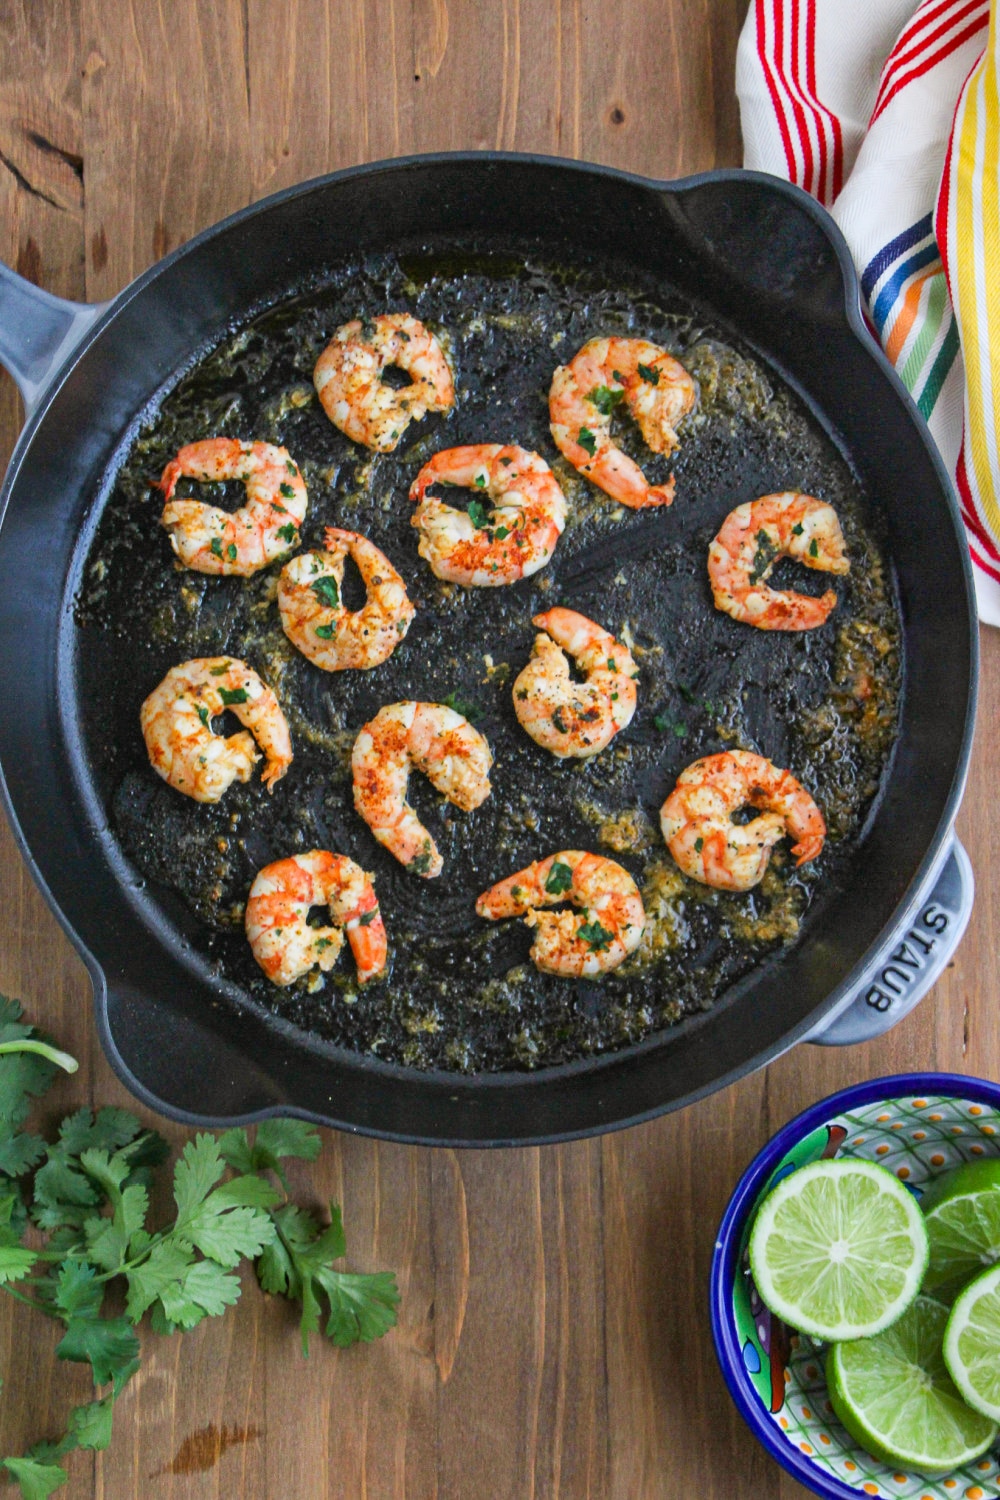 Prepared shrimp in large skillet sitting next to a striped towel and a bowl of limes.